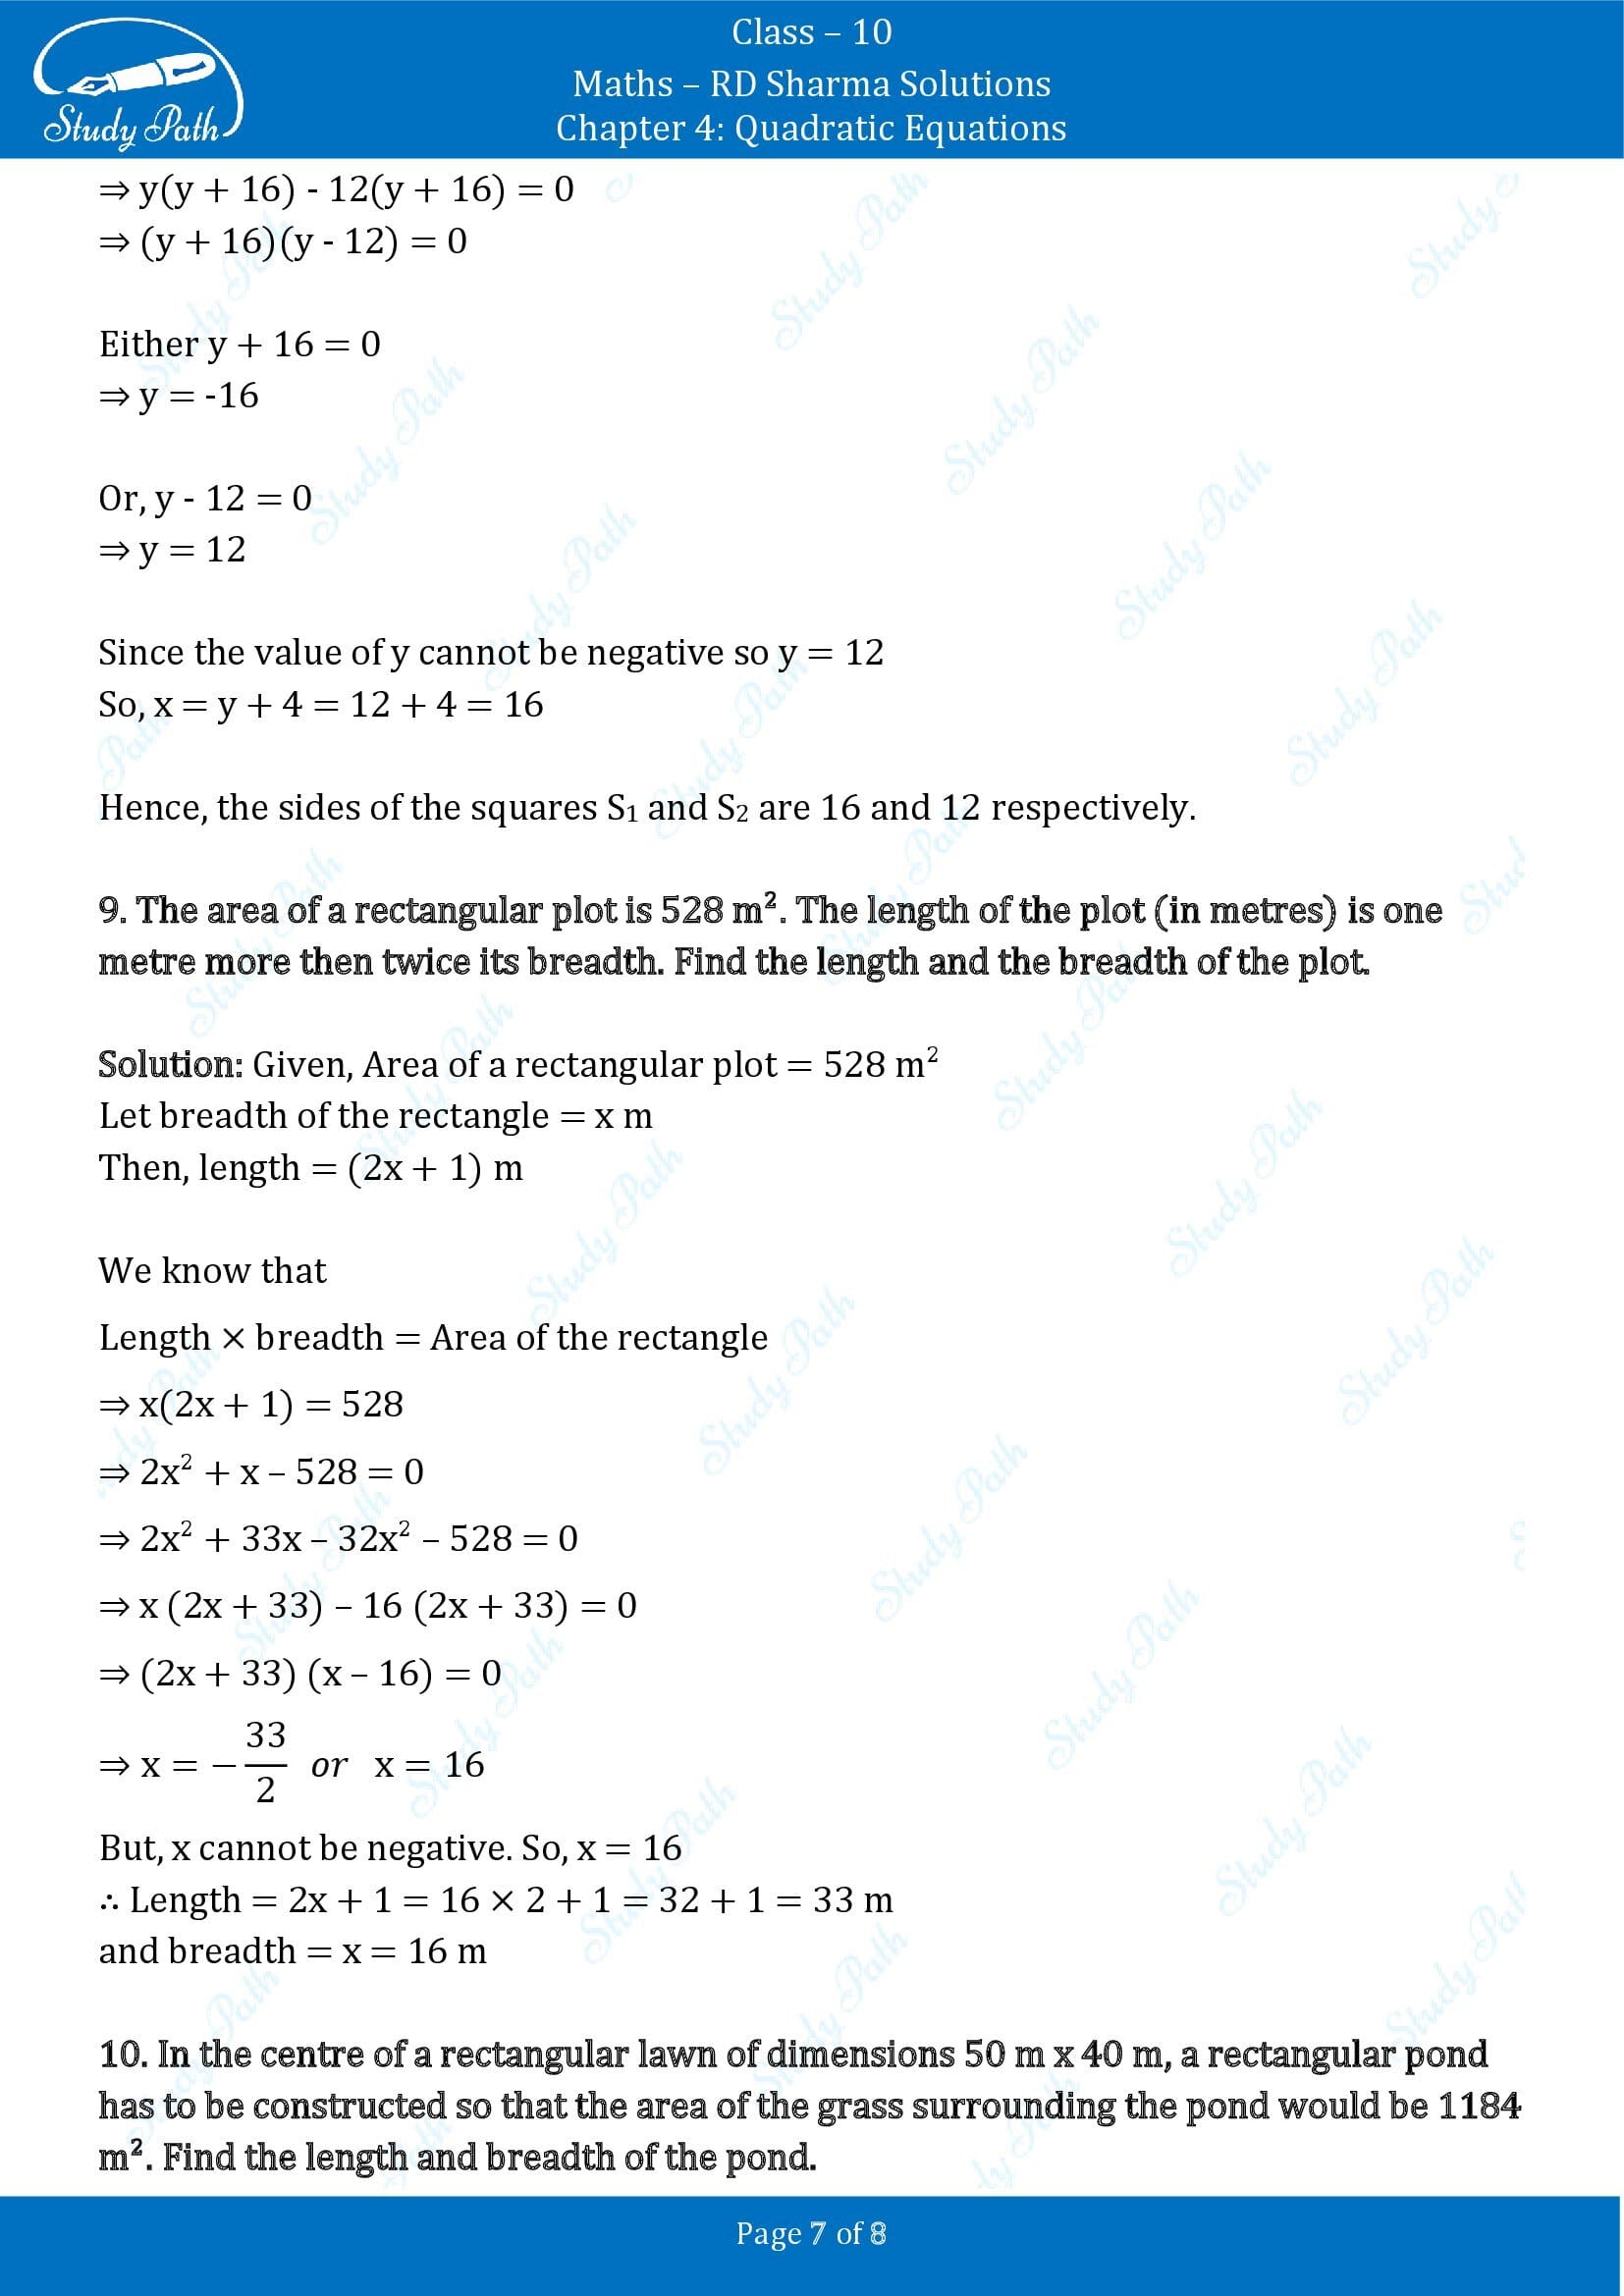 RD Sharma Solutions Class 10 Chapter 4 Quadratic Equations Exercise 4.11 00007